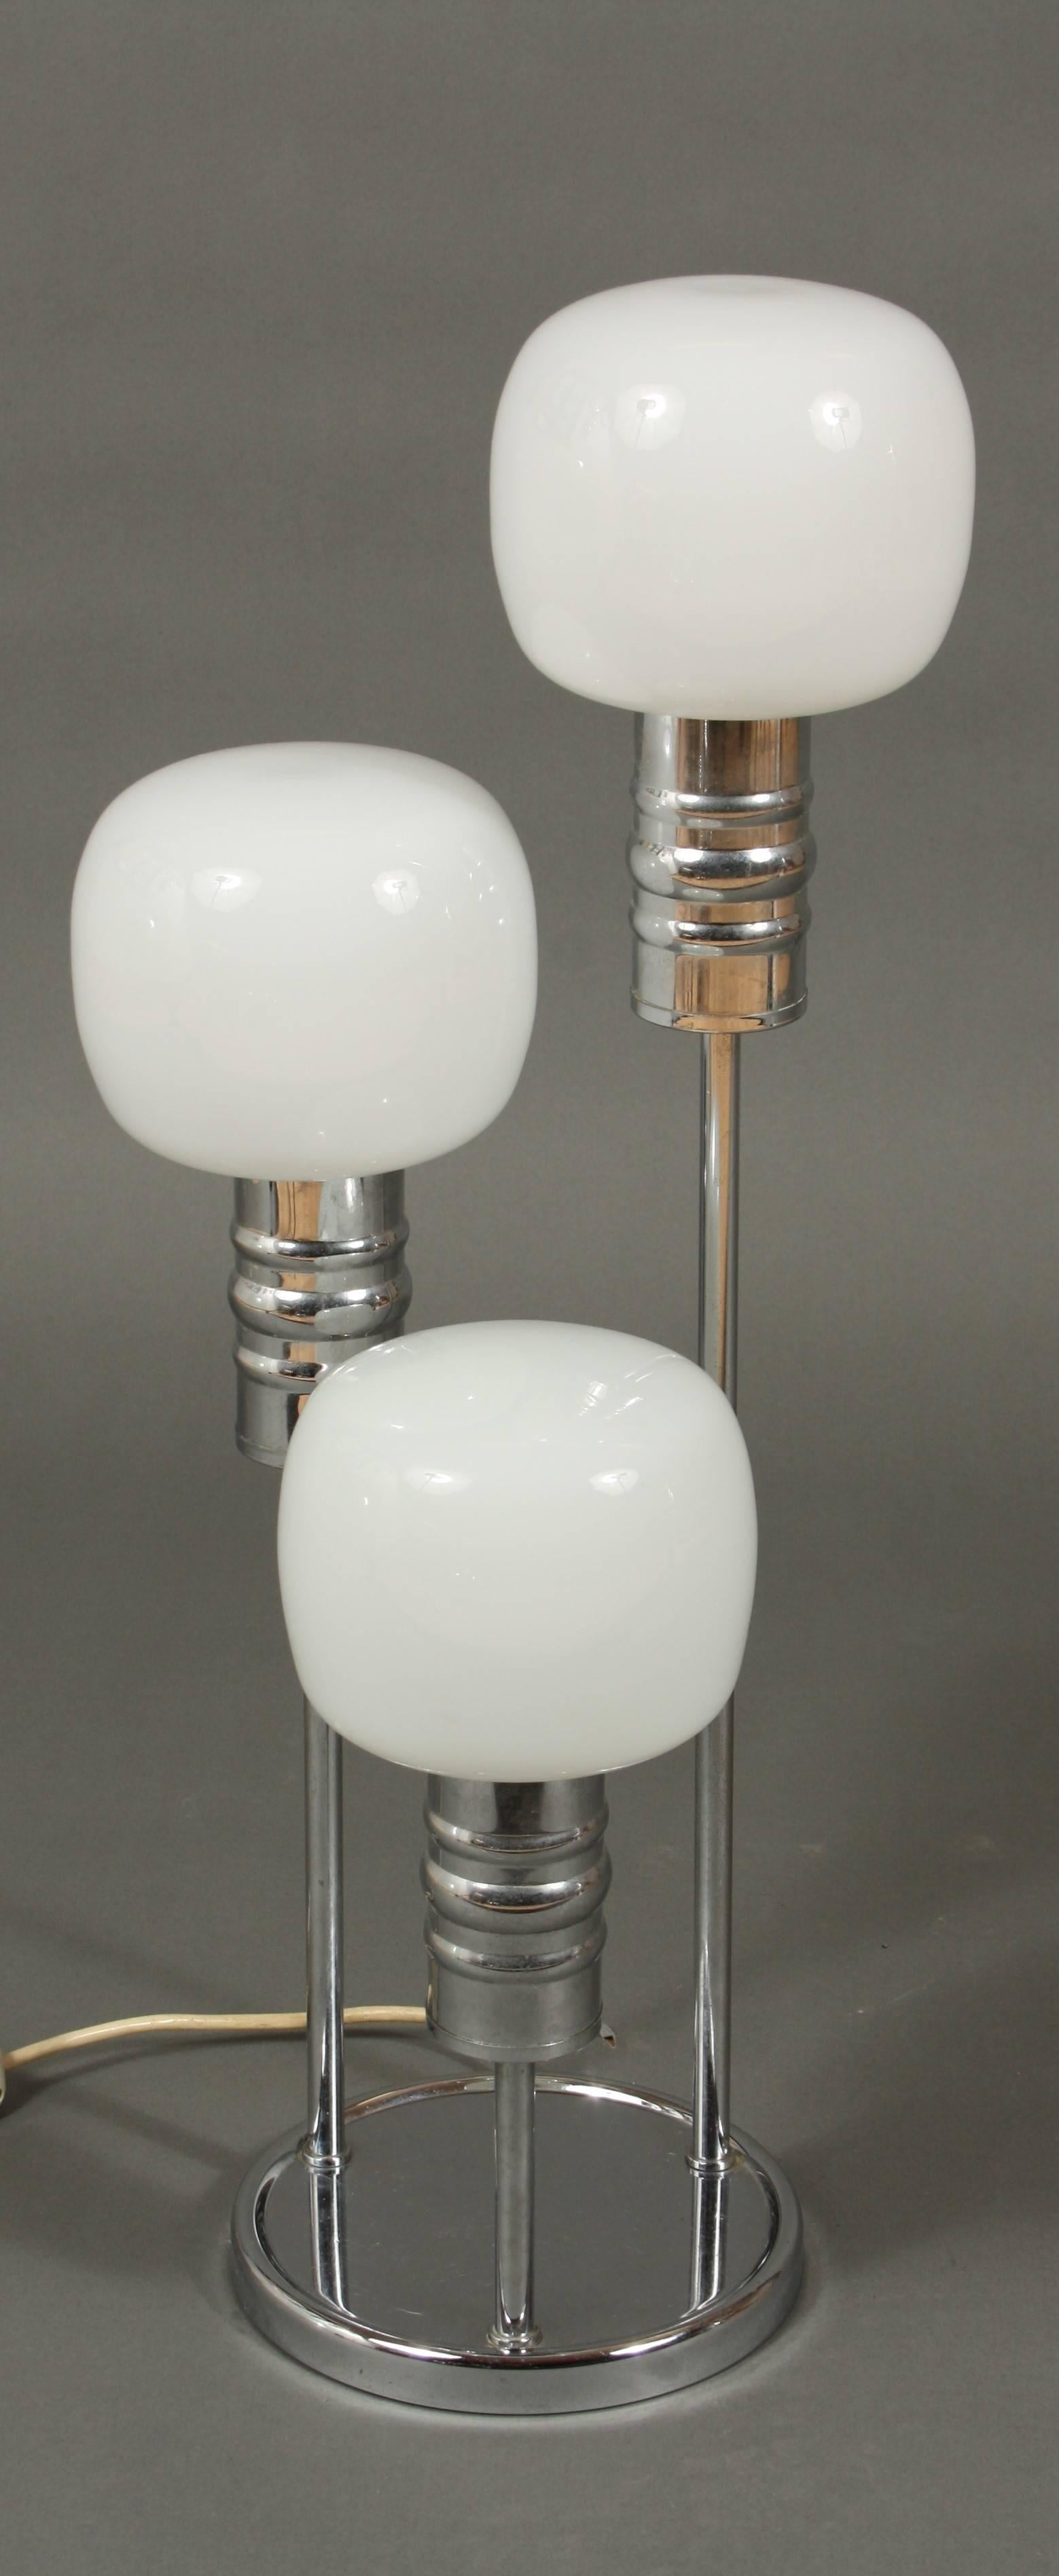 Chrome table lamp with three white glasses. The lamp is made of chrome-plated steel with three white milk-glass globes.

The table lamp lights with three bulbs and has an on/off switch.

 